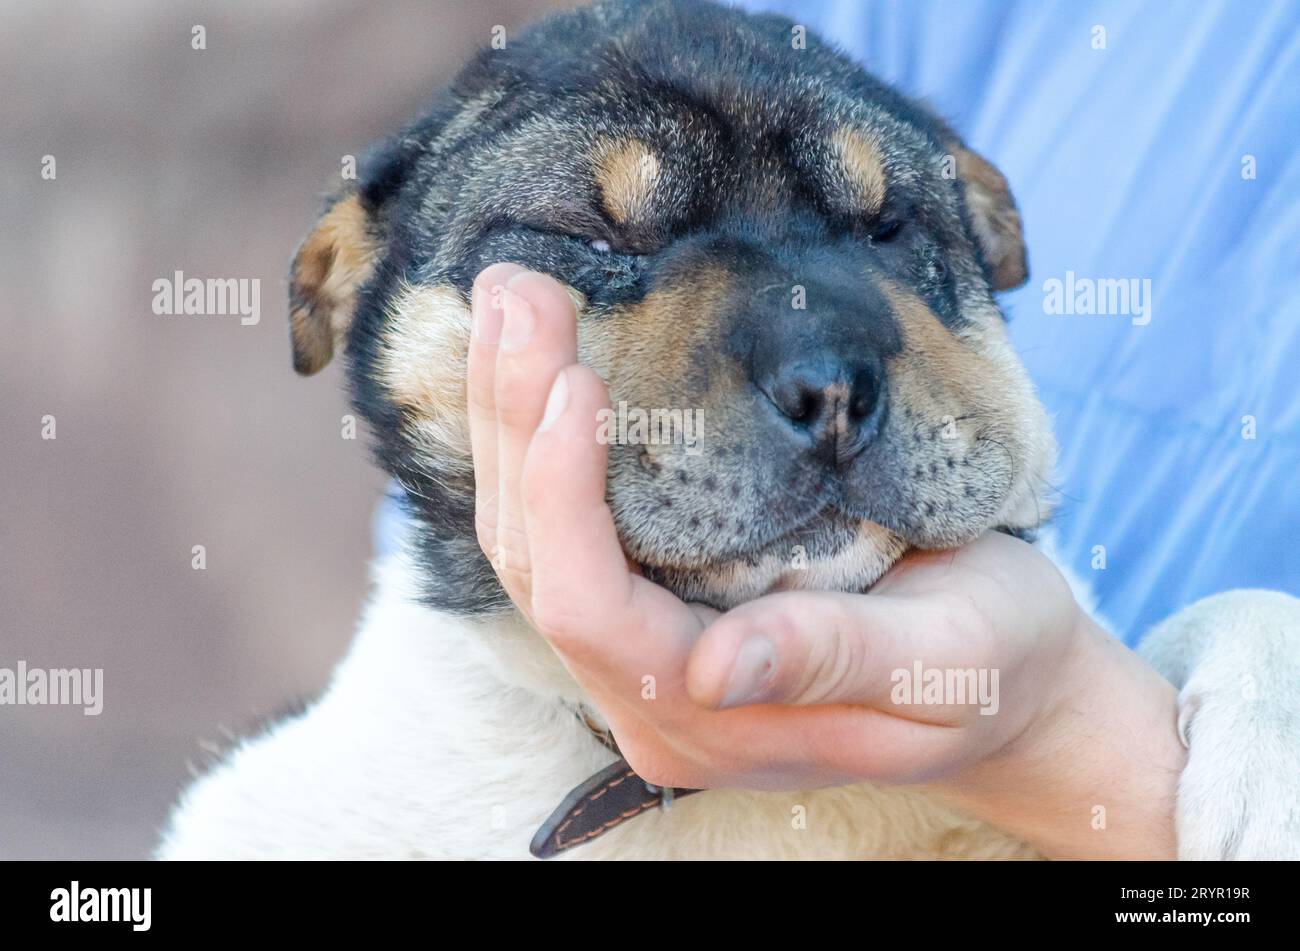 Male palm holds muzzle of half-breed Shar Pei puppy Stock Photo